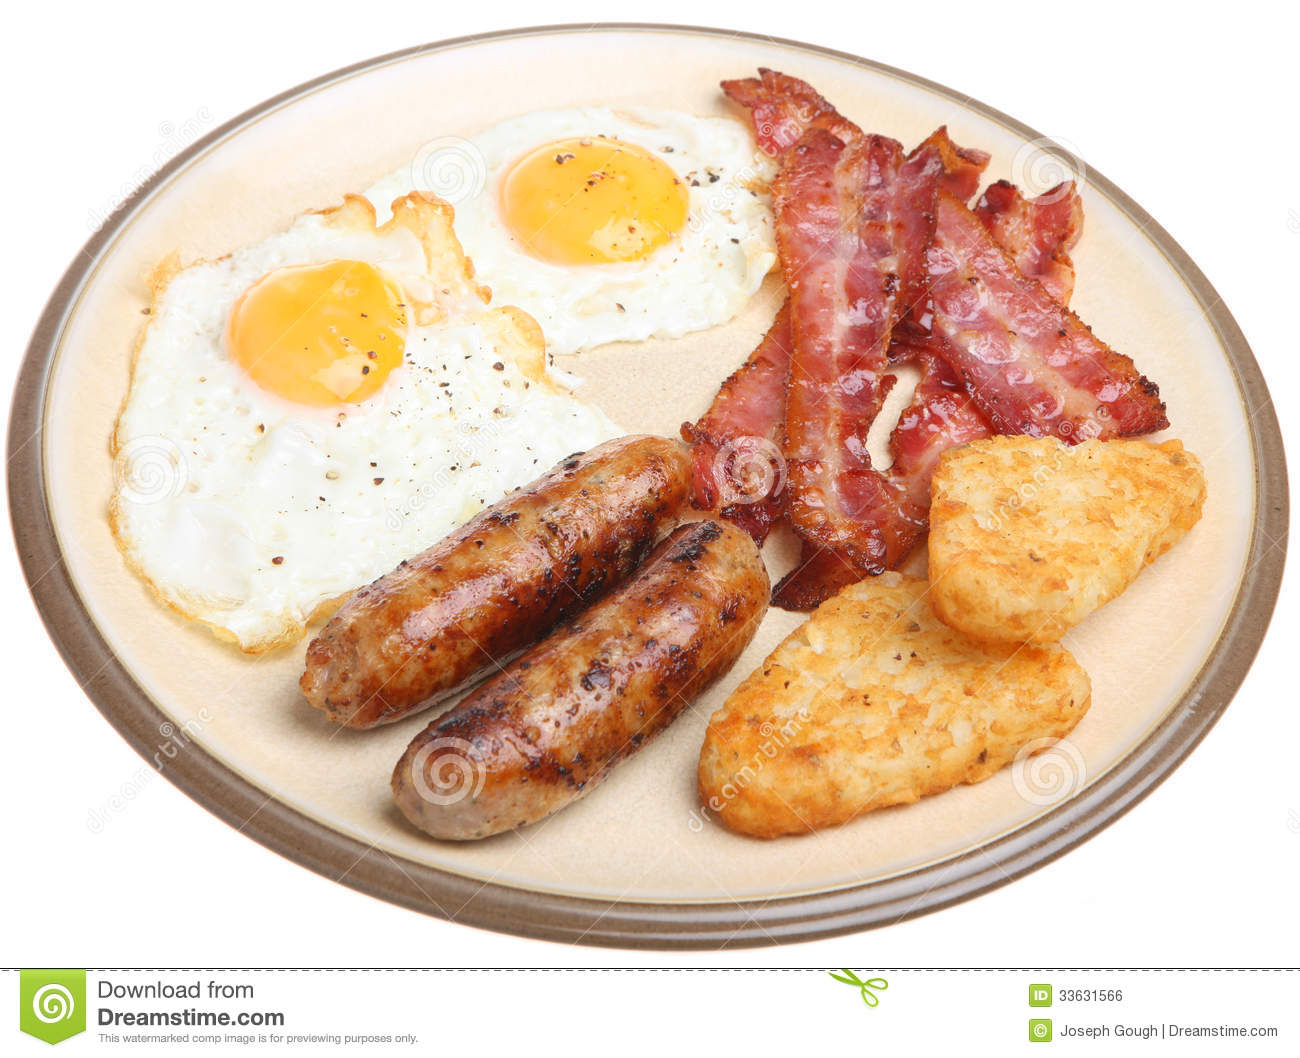 English Fried Breakfast With Eggs Sausages Bacon And Hash Browns 